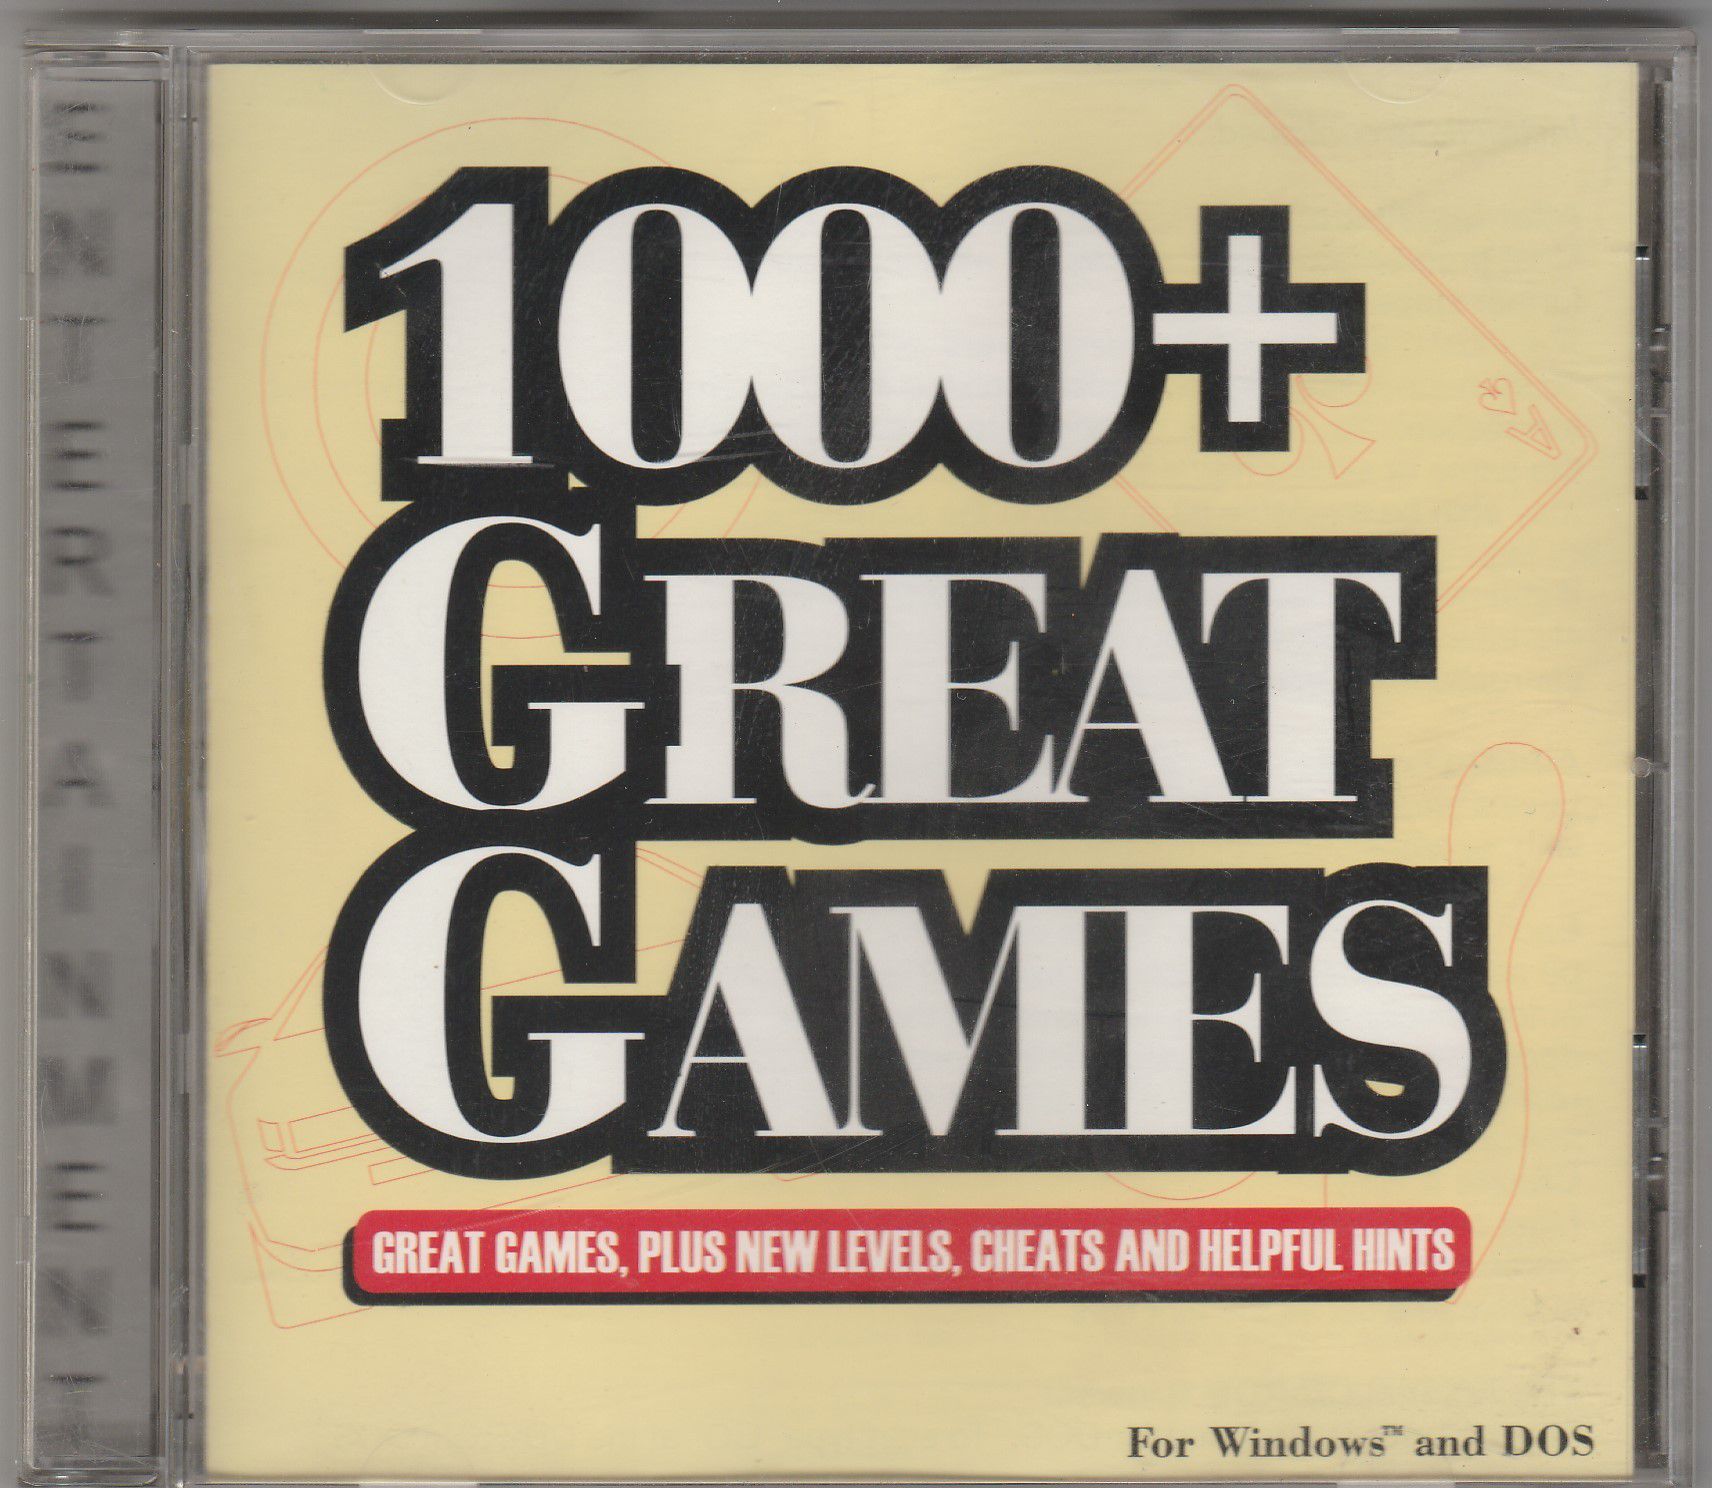 1000+ Great Games by ValuSoft for Windows & DOS